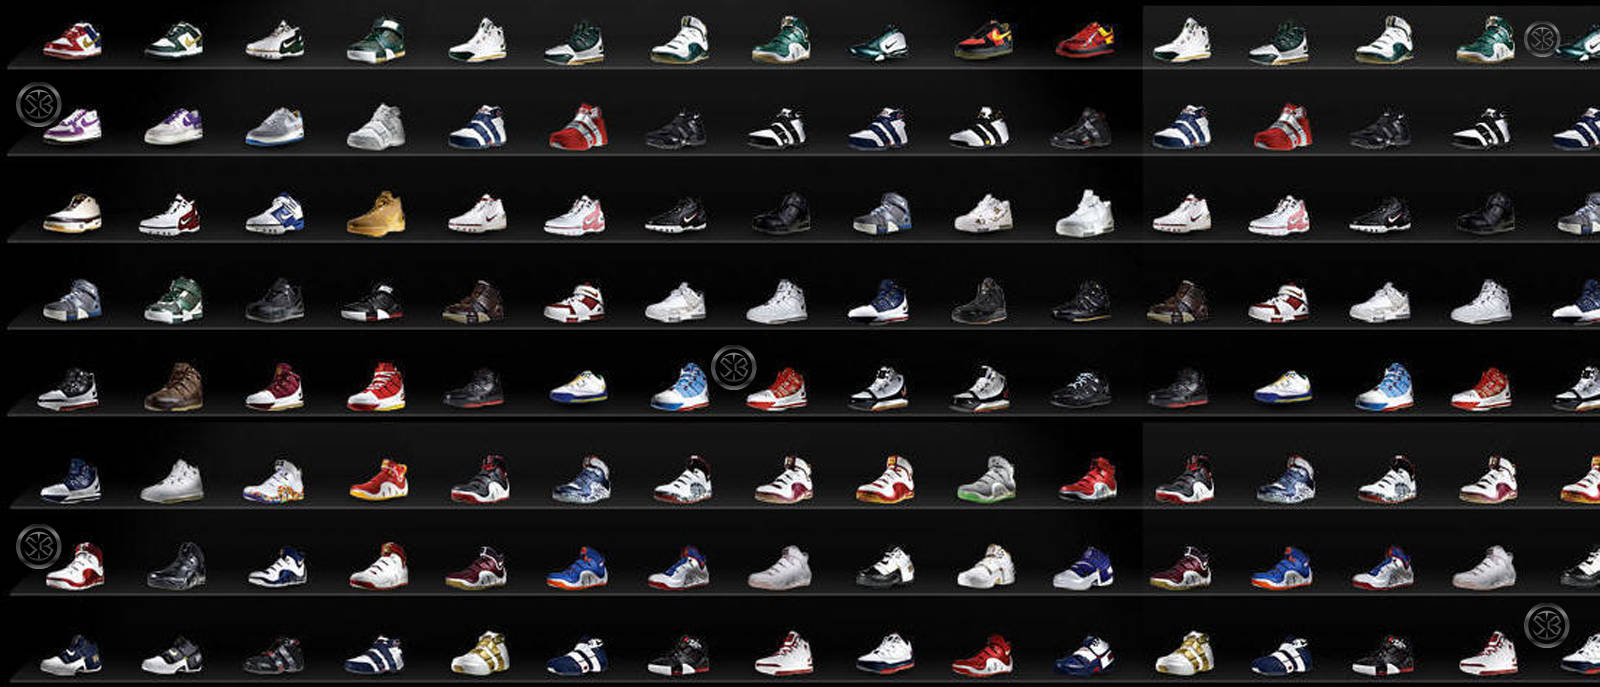 Impressive Sneaker Collection in Display Cabinet Wallpaper